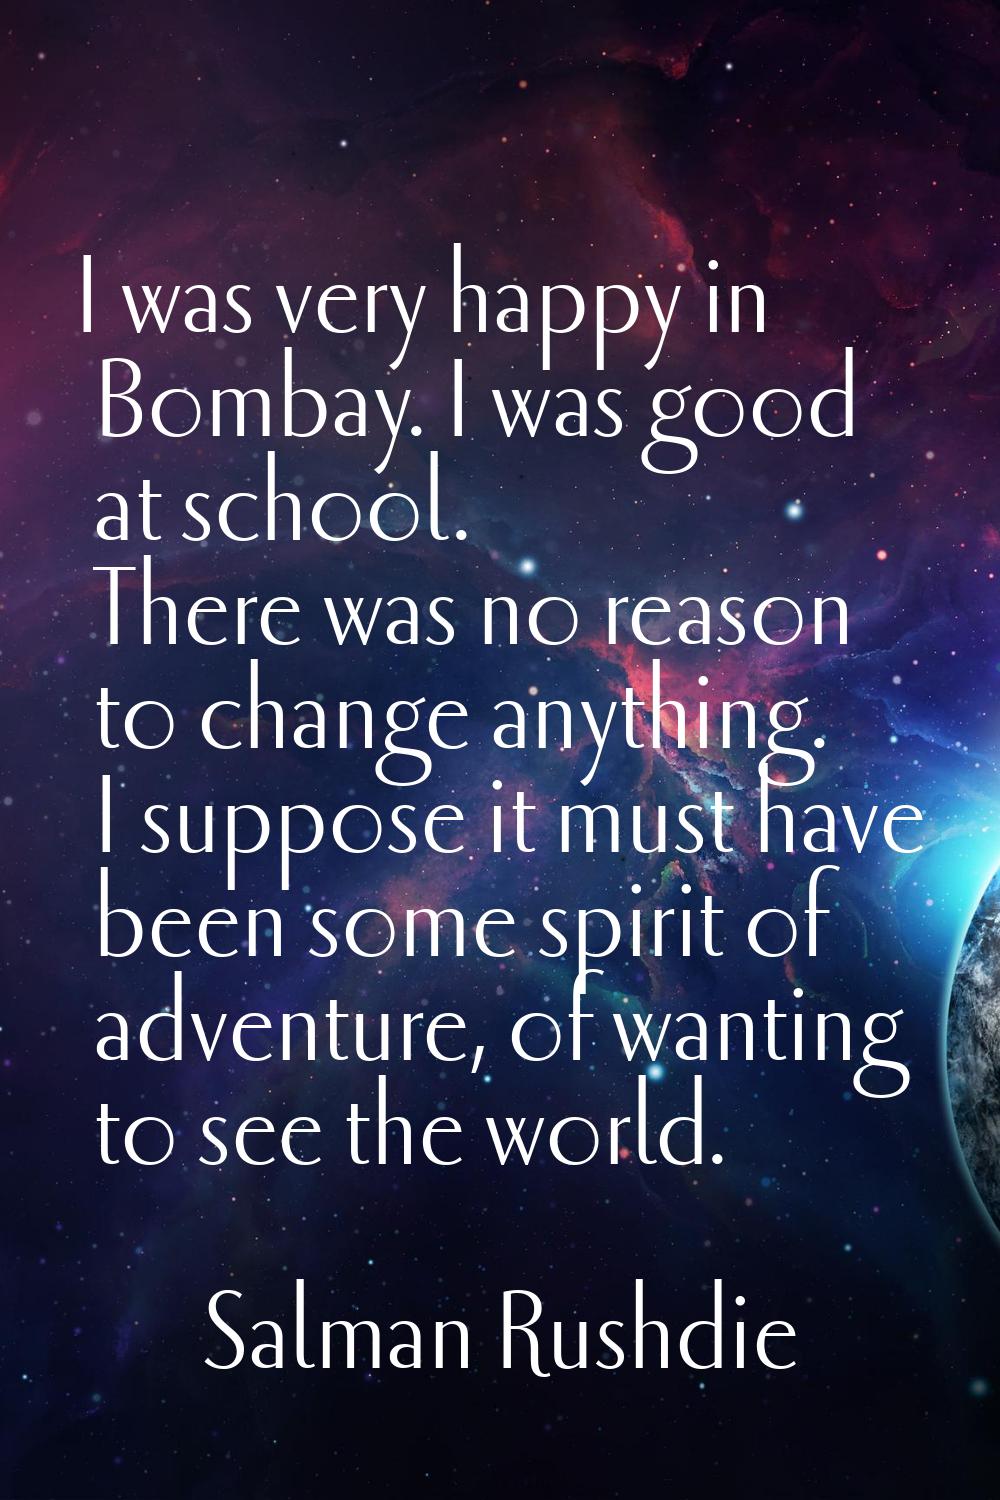 I was very happy in Bombay. I was good at school. There was no reason to change anything. I suppose